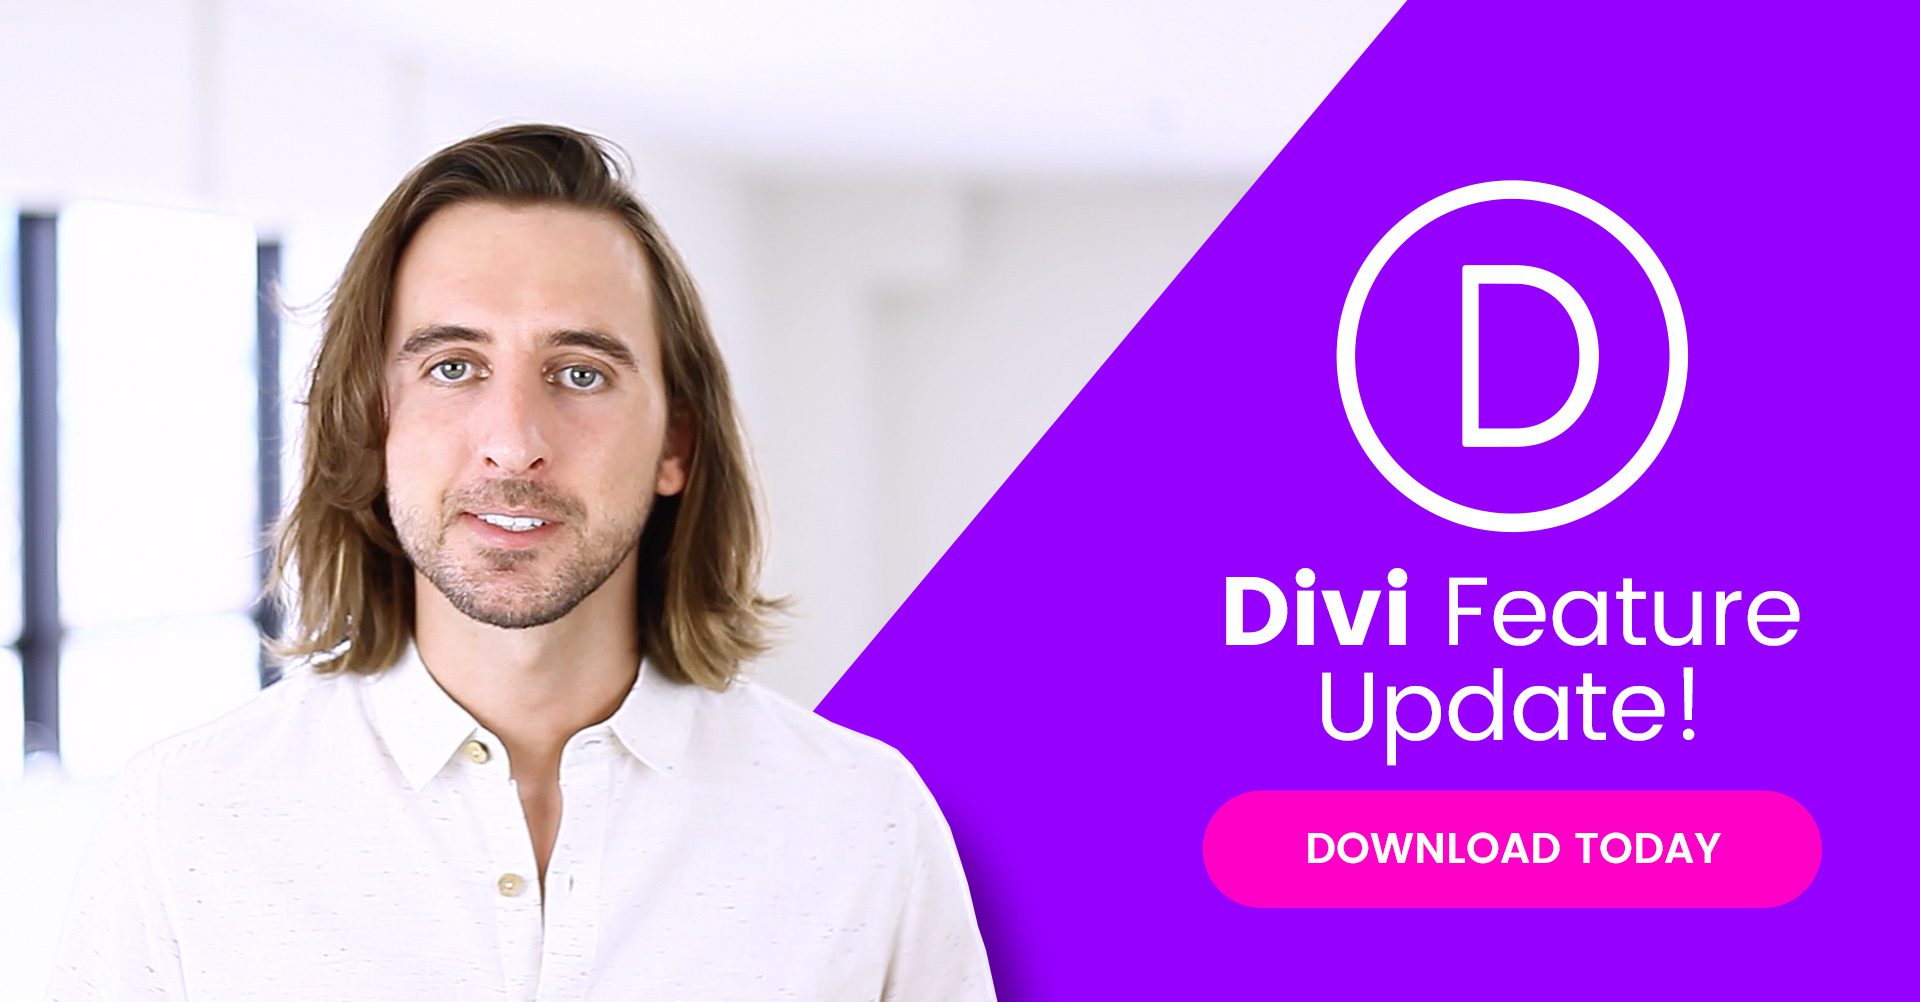 Divi Performance Enhancement! Improved Google PageSpeed Scores, Reduced File Sizes and Requests